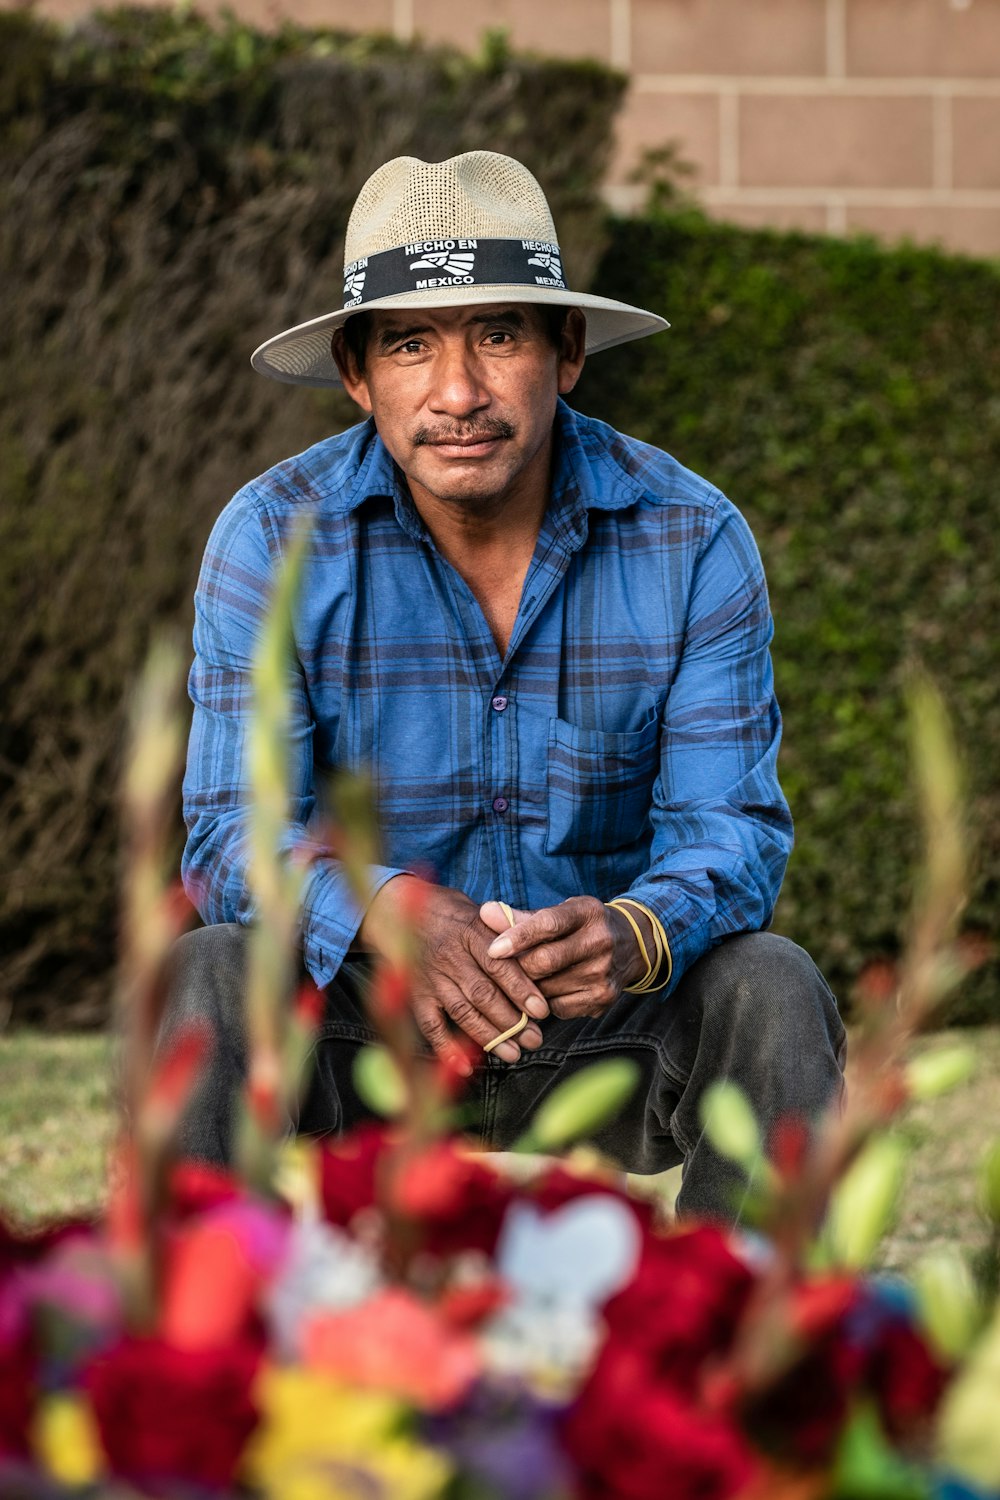 man in blue and white plaid dress shirt wearing brown cowboy hat sitting on red flower